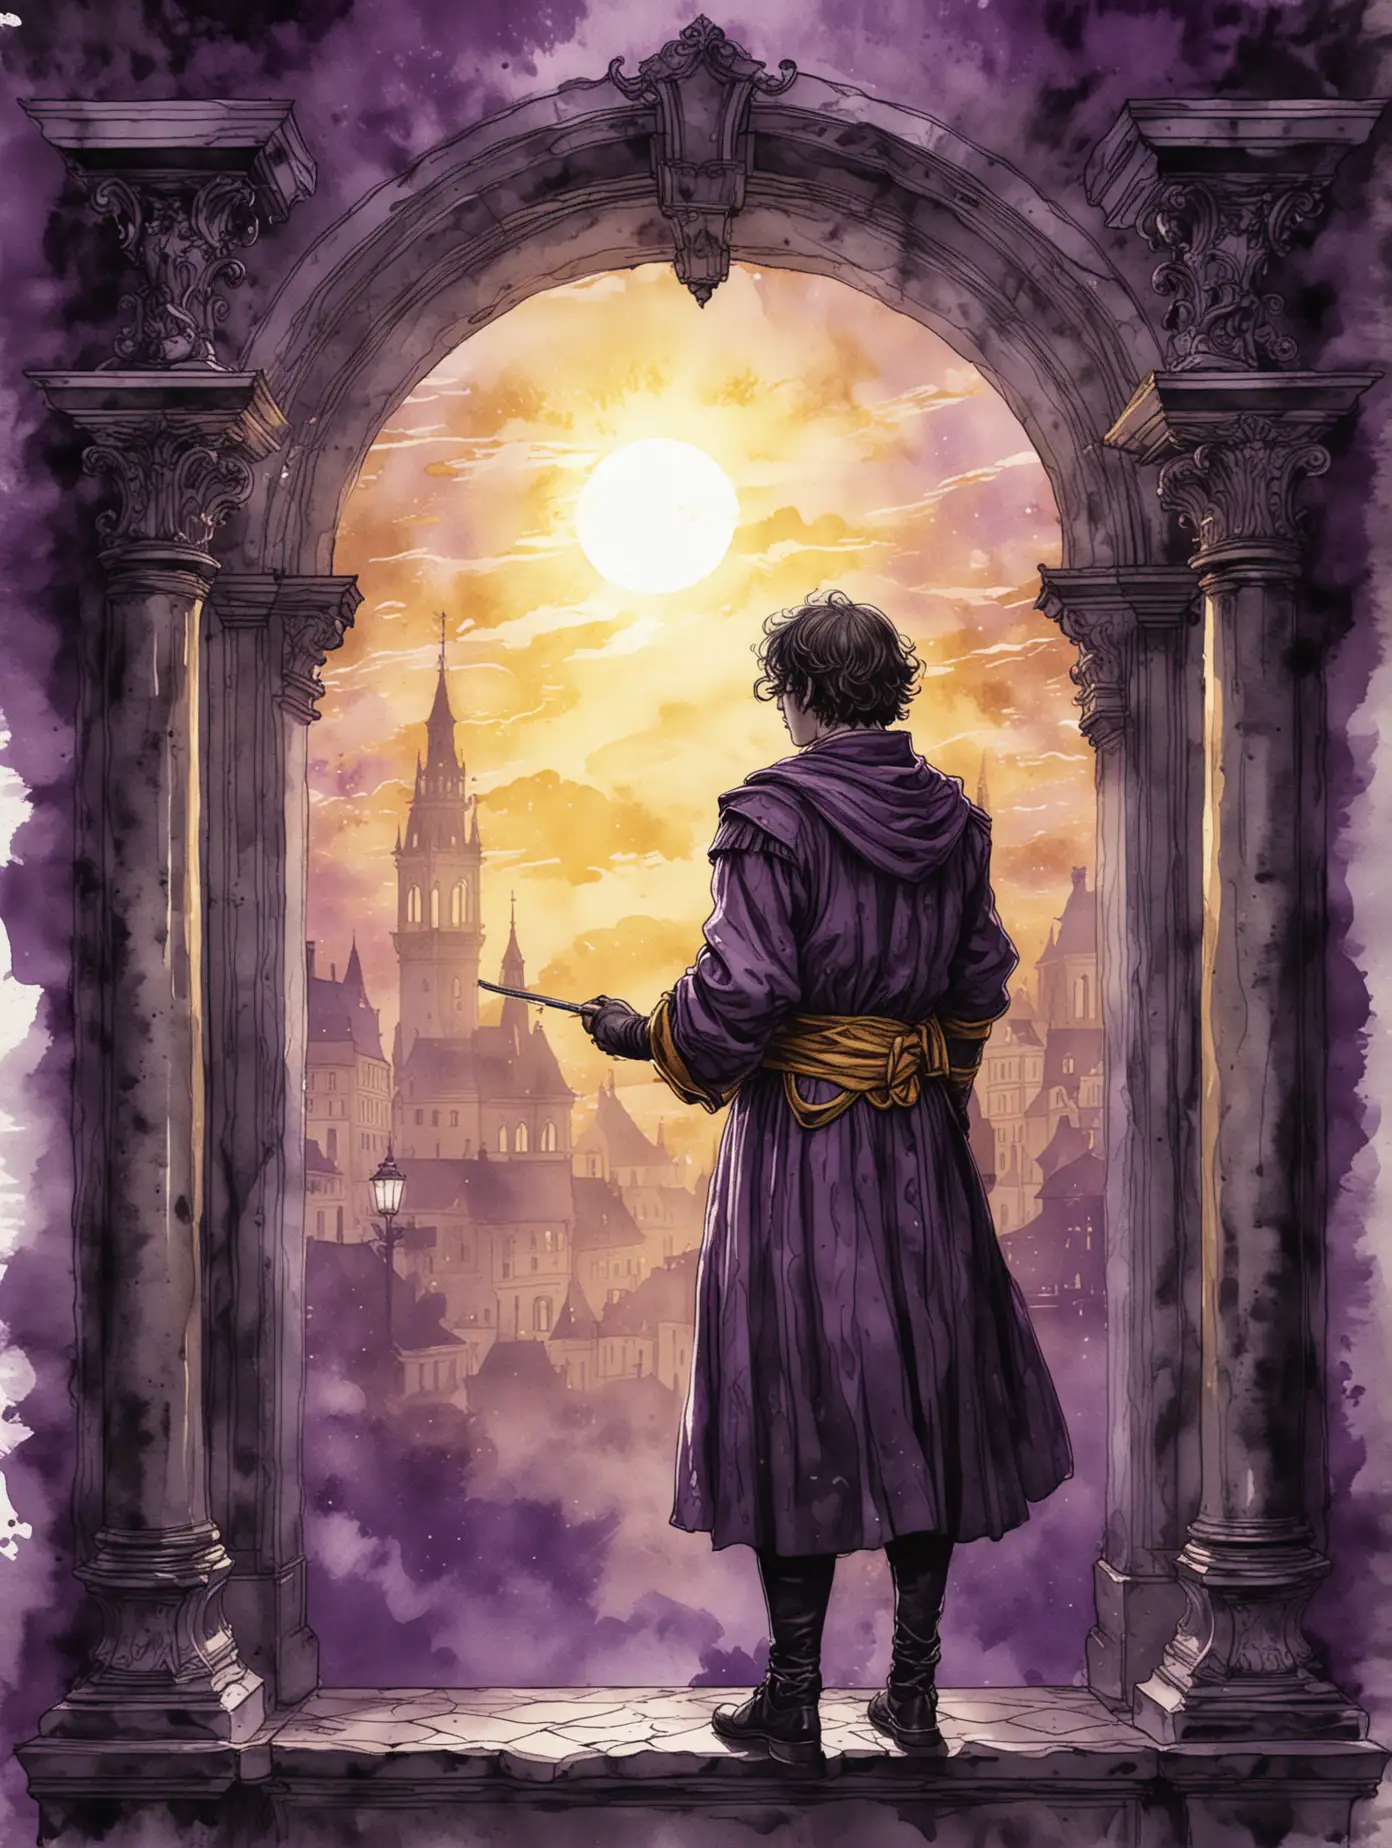 Dark Academia Digital Illustration Golden Light Amidst Black and Purple Watercolor and Ink Wash